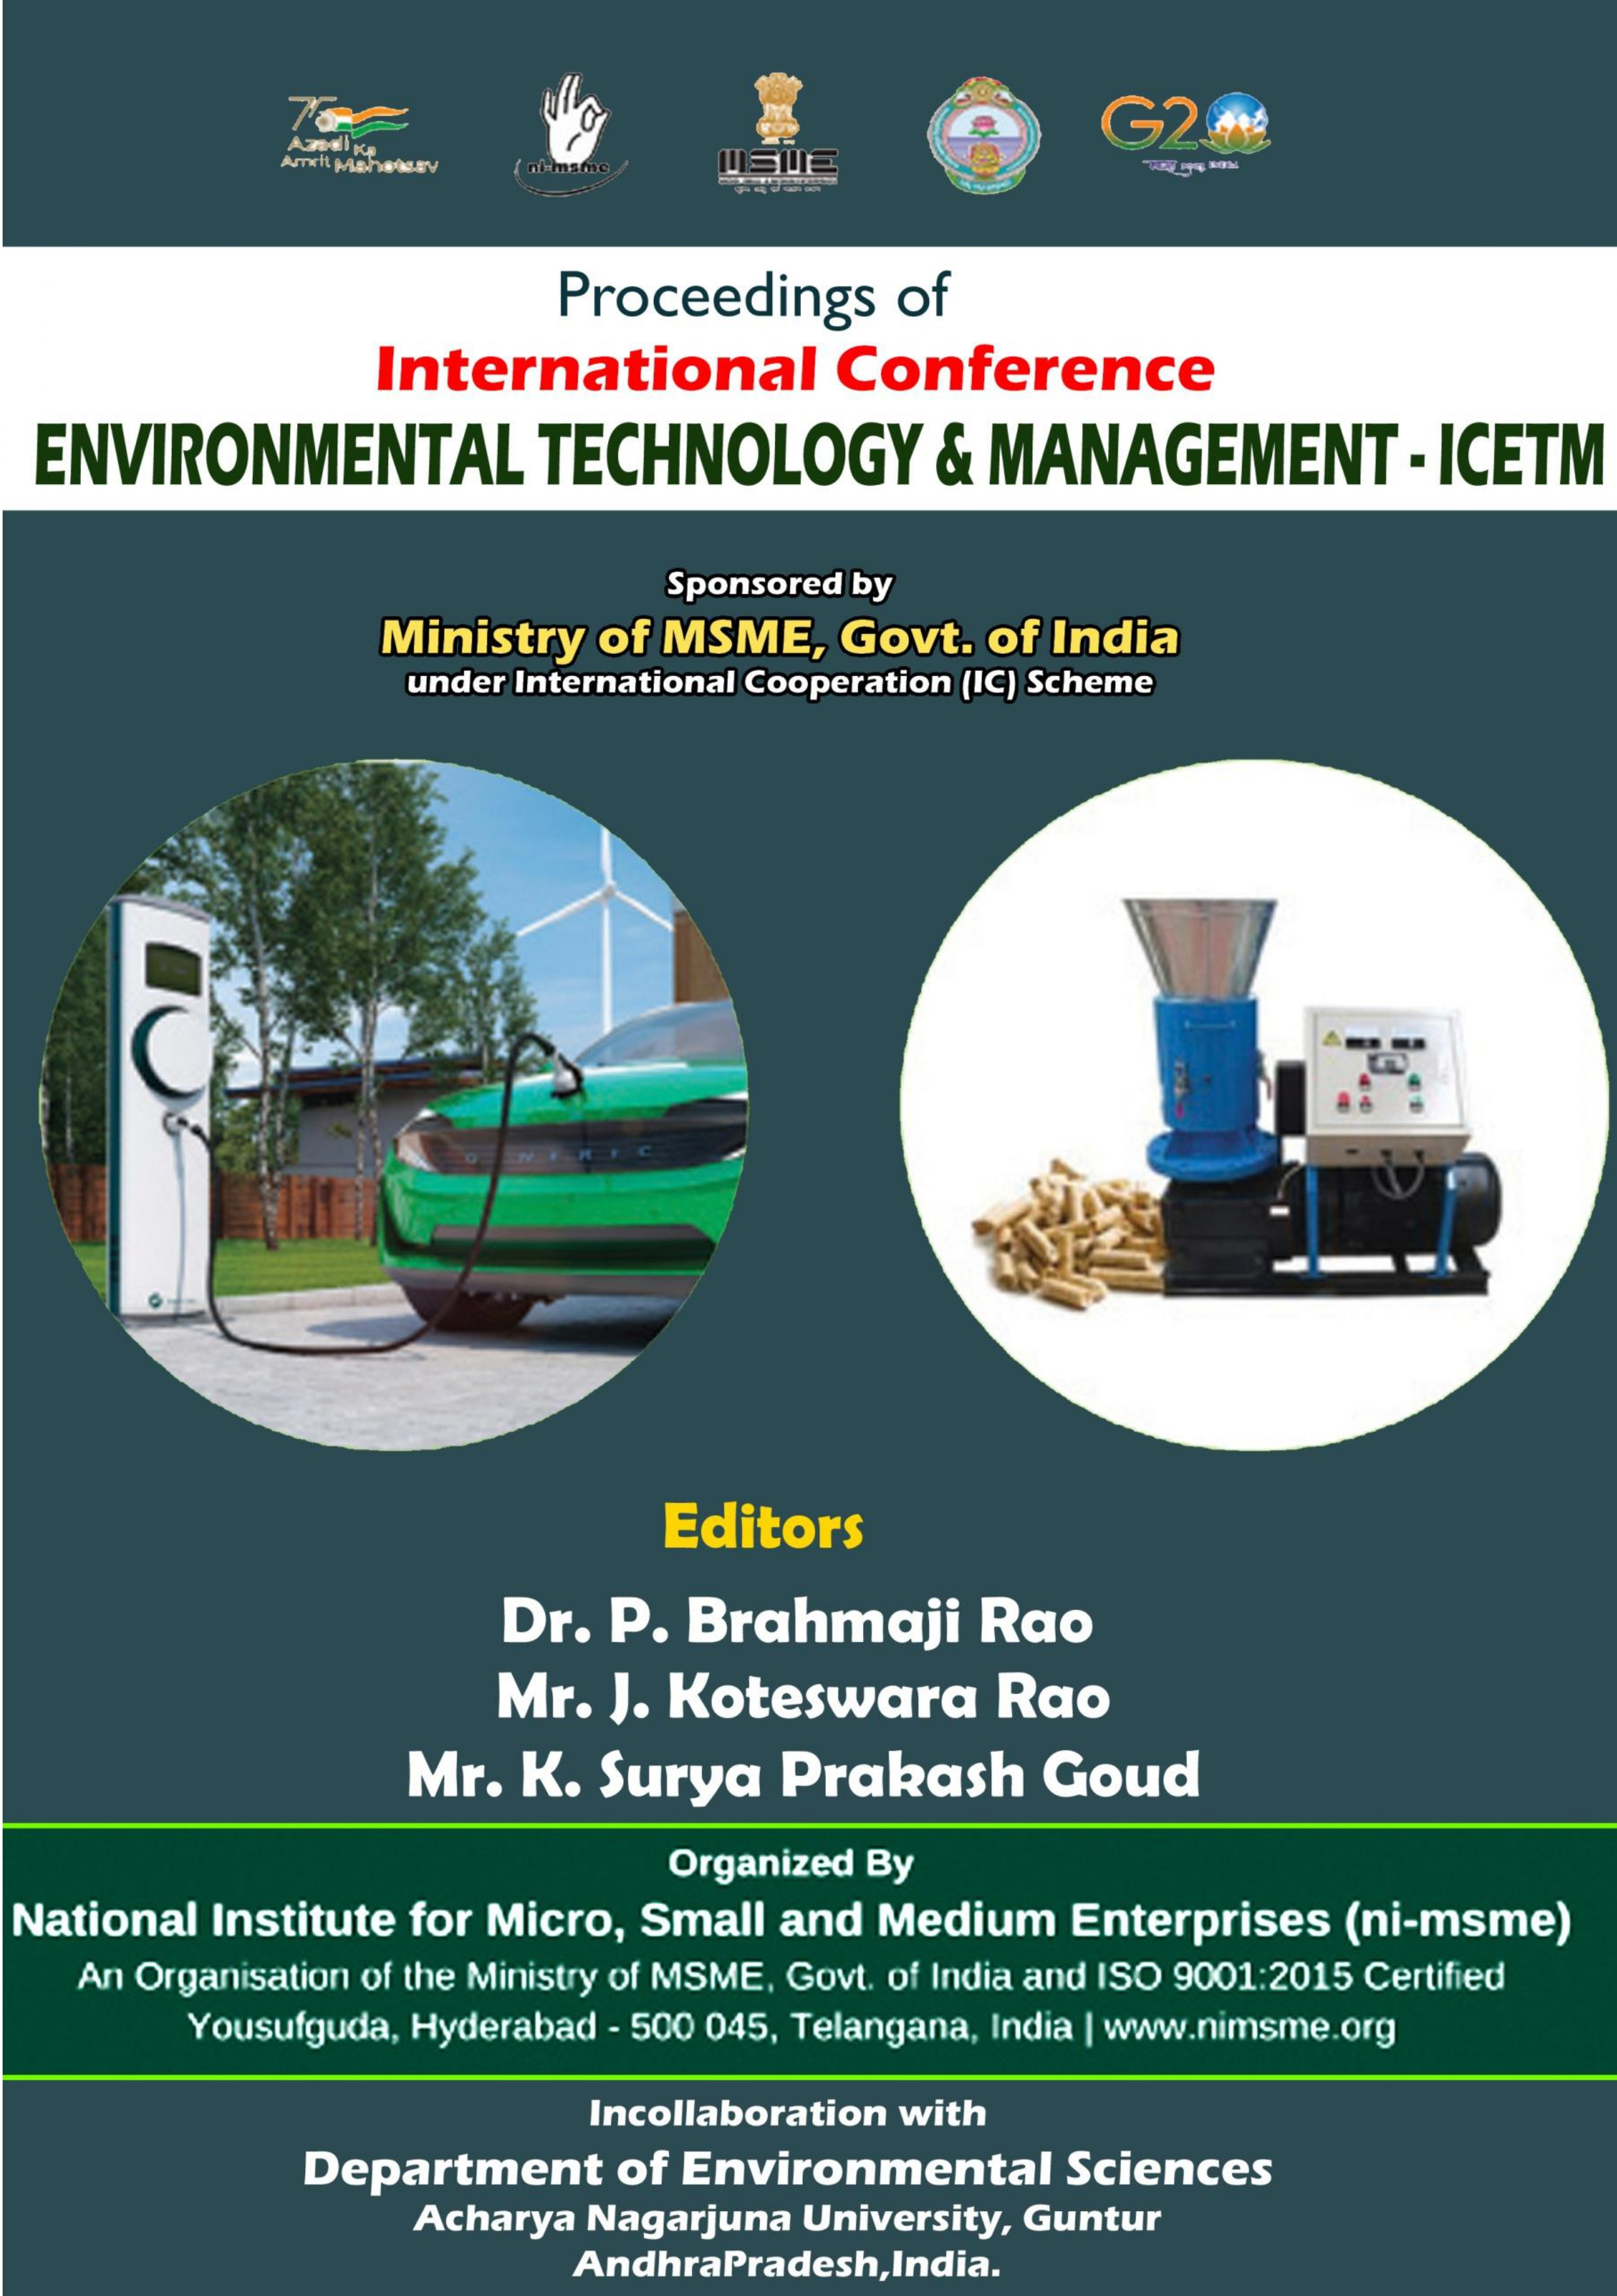 International Conference on Environmental Technology & Management